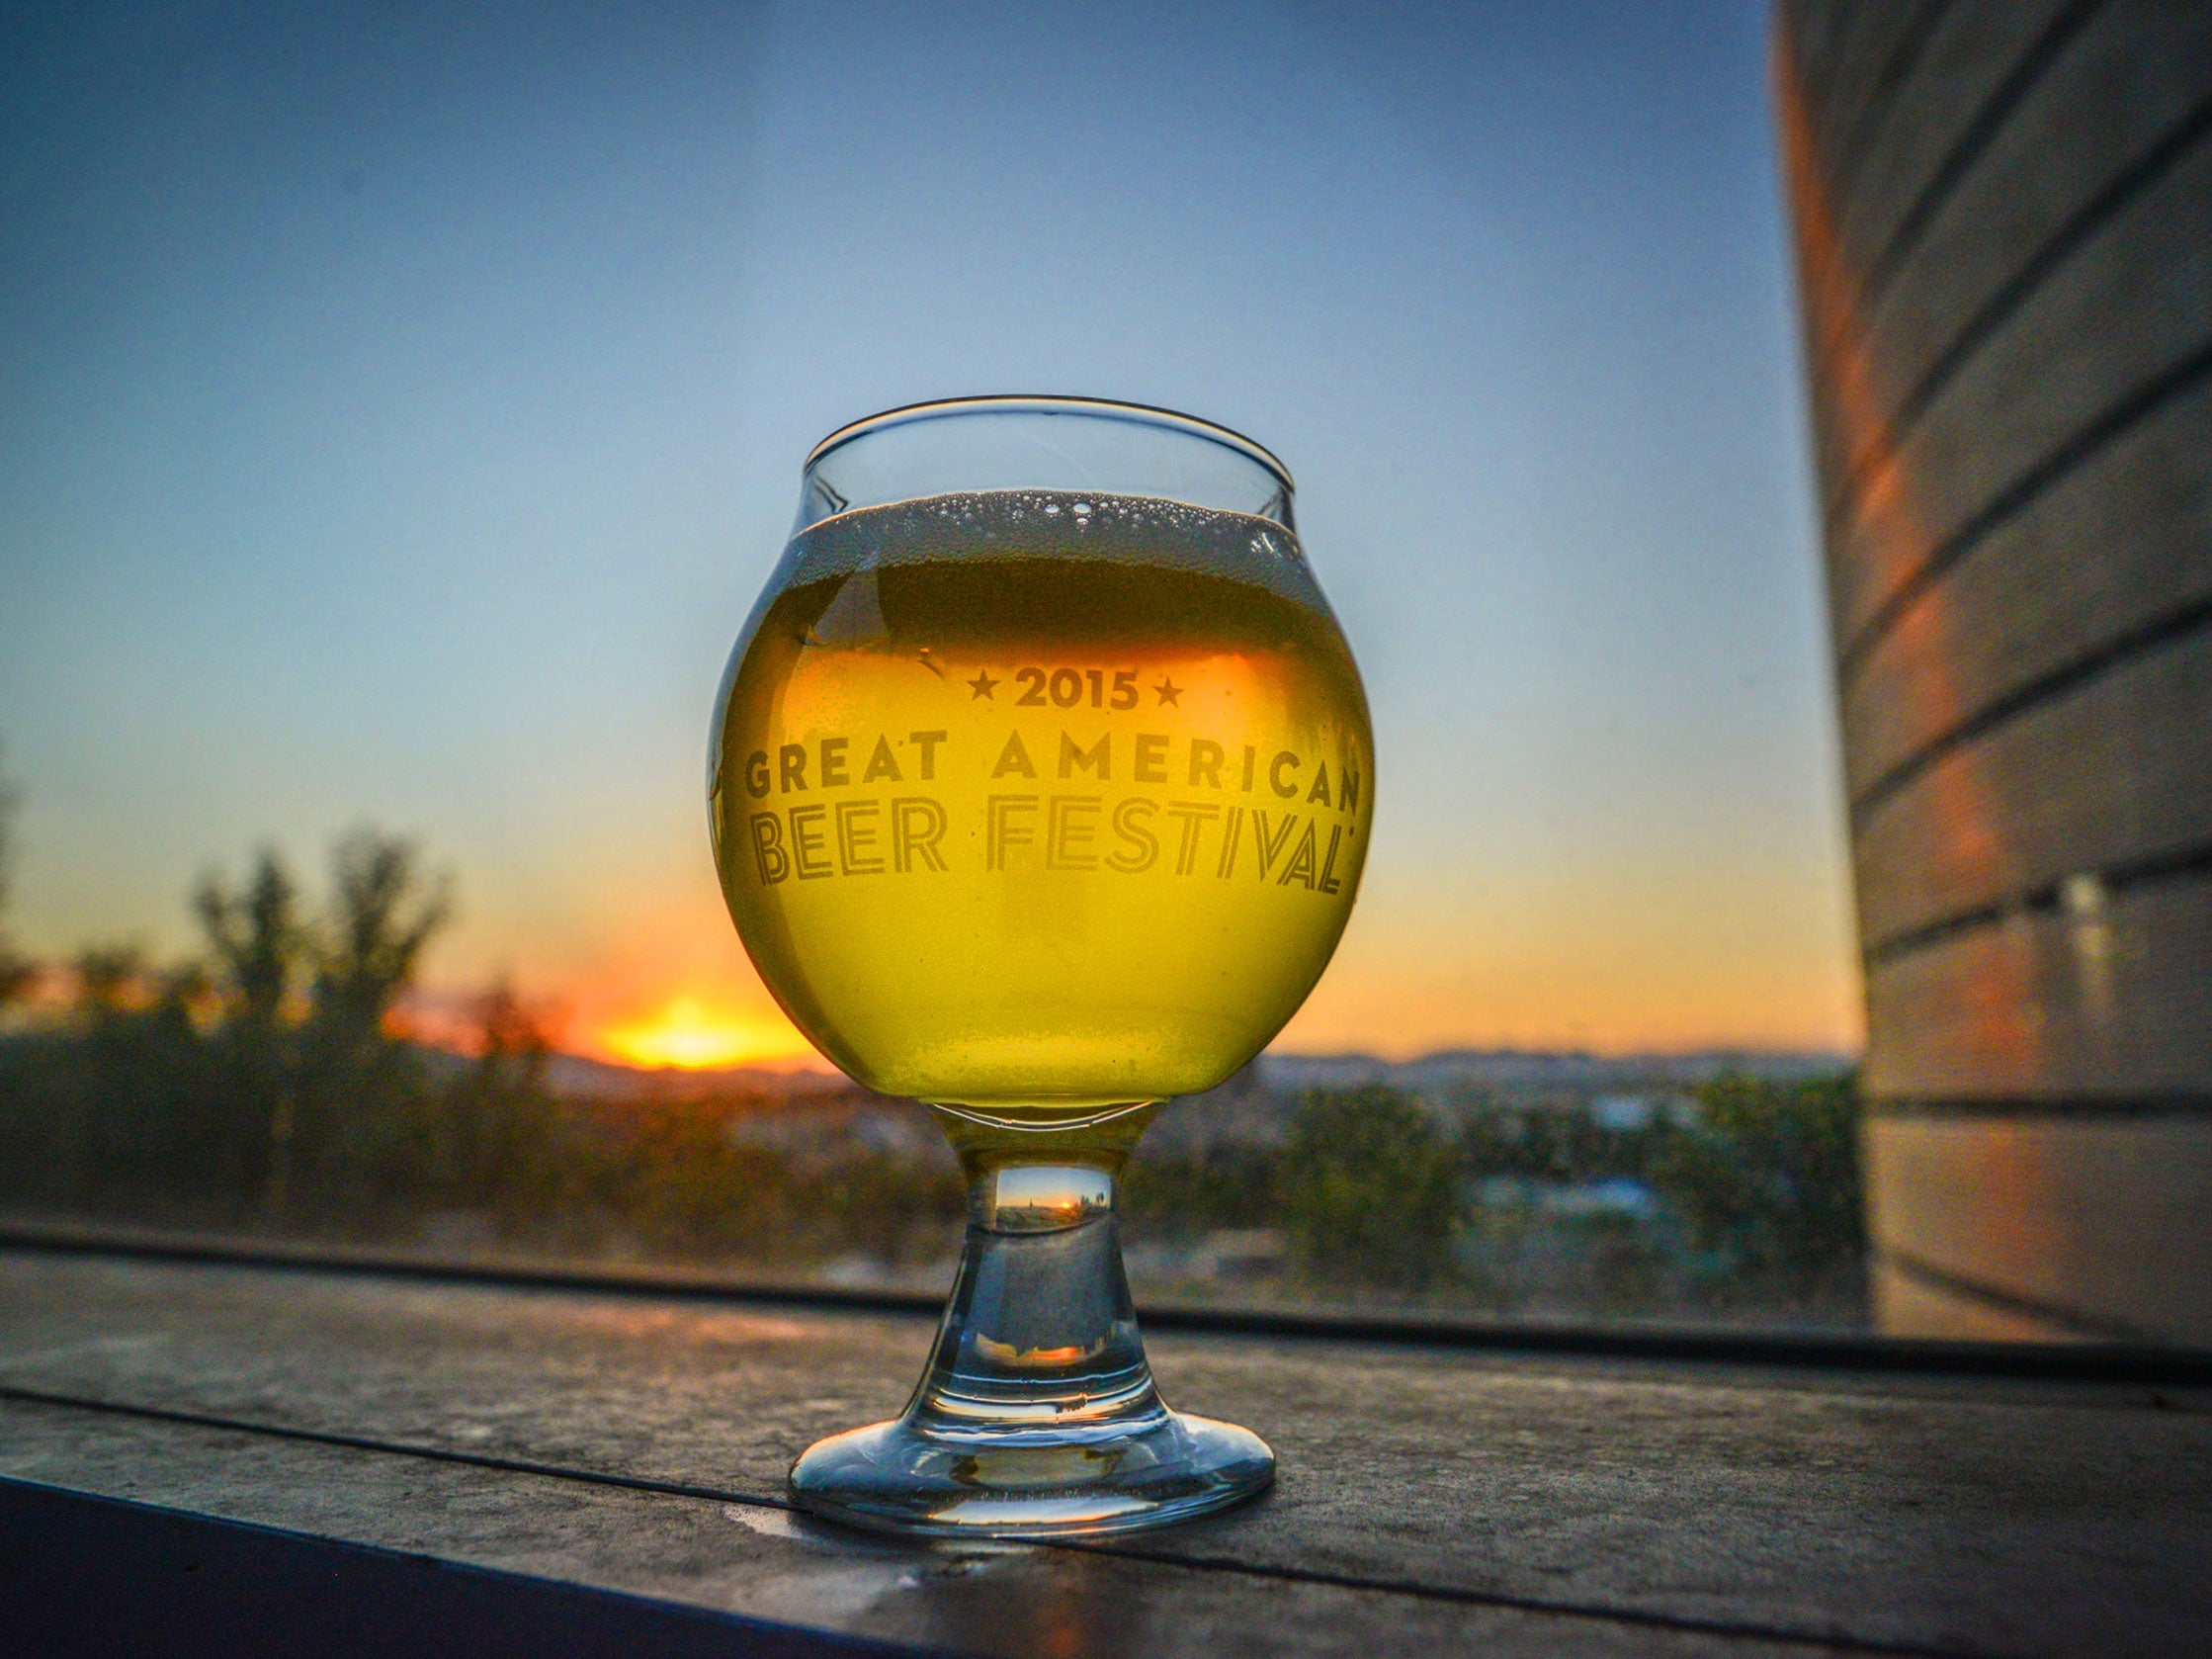 The Great American Beer Festival Awards celebrated its 29th event on 26 September 2015